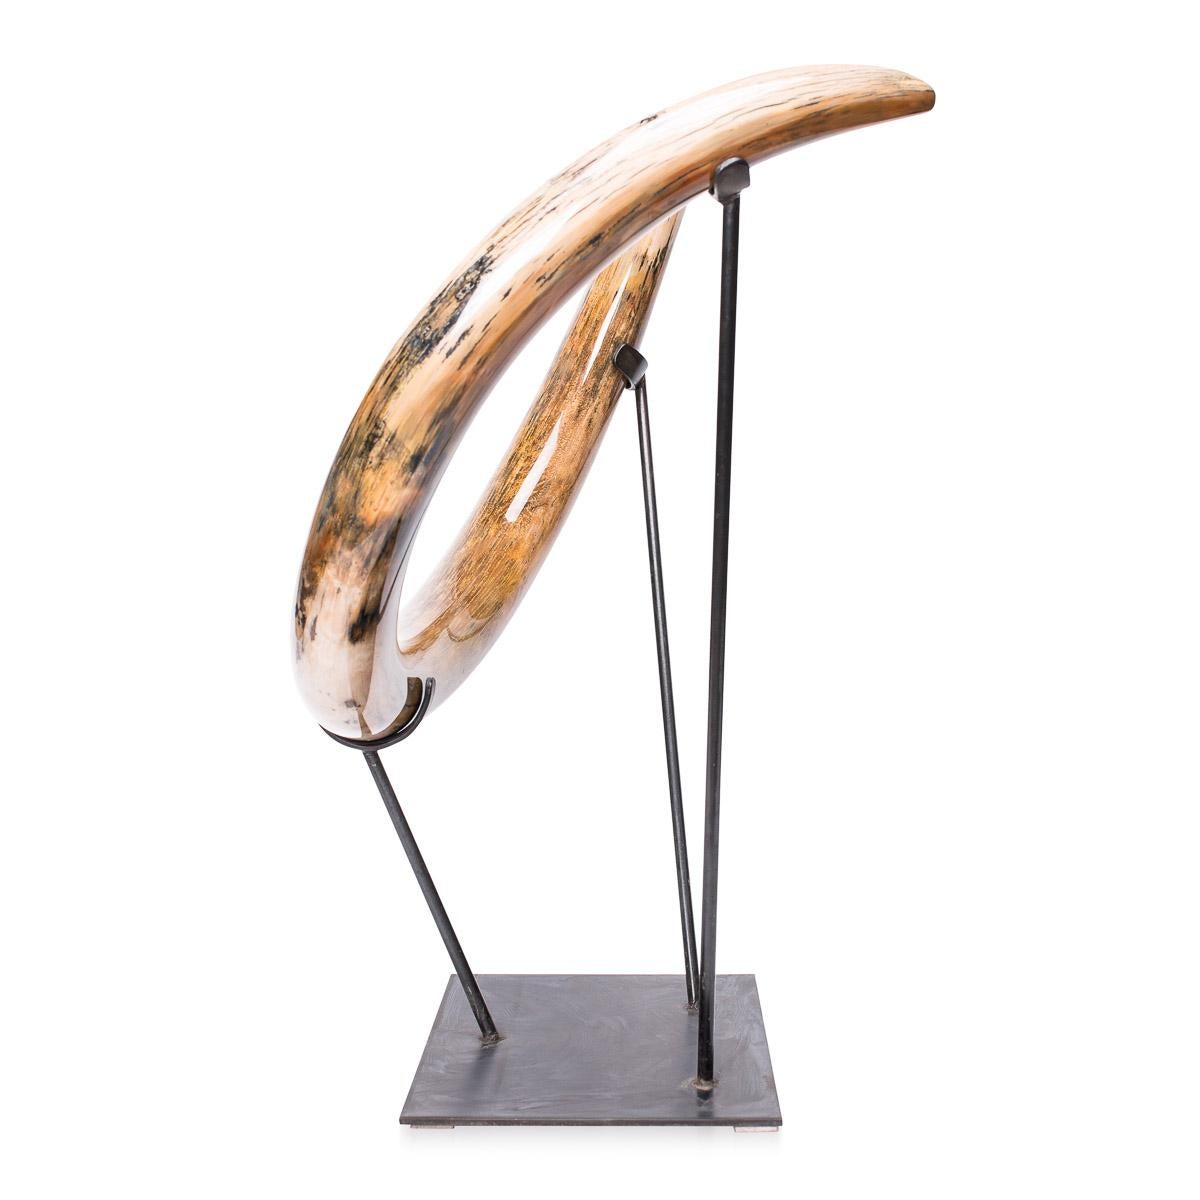 Top quality Siberian woolly mammoth tusk (Mammuthus primigenius) in immaculate condition. This tusk was recovered from the Siberian permafrost in recent years and has been restored only from the outside with a thin layer of transparent wax (a